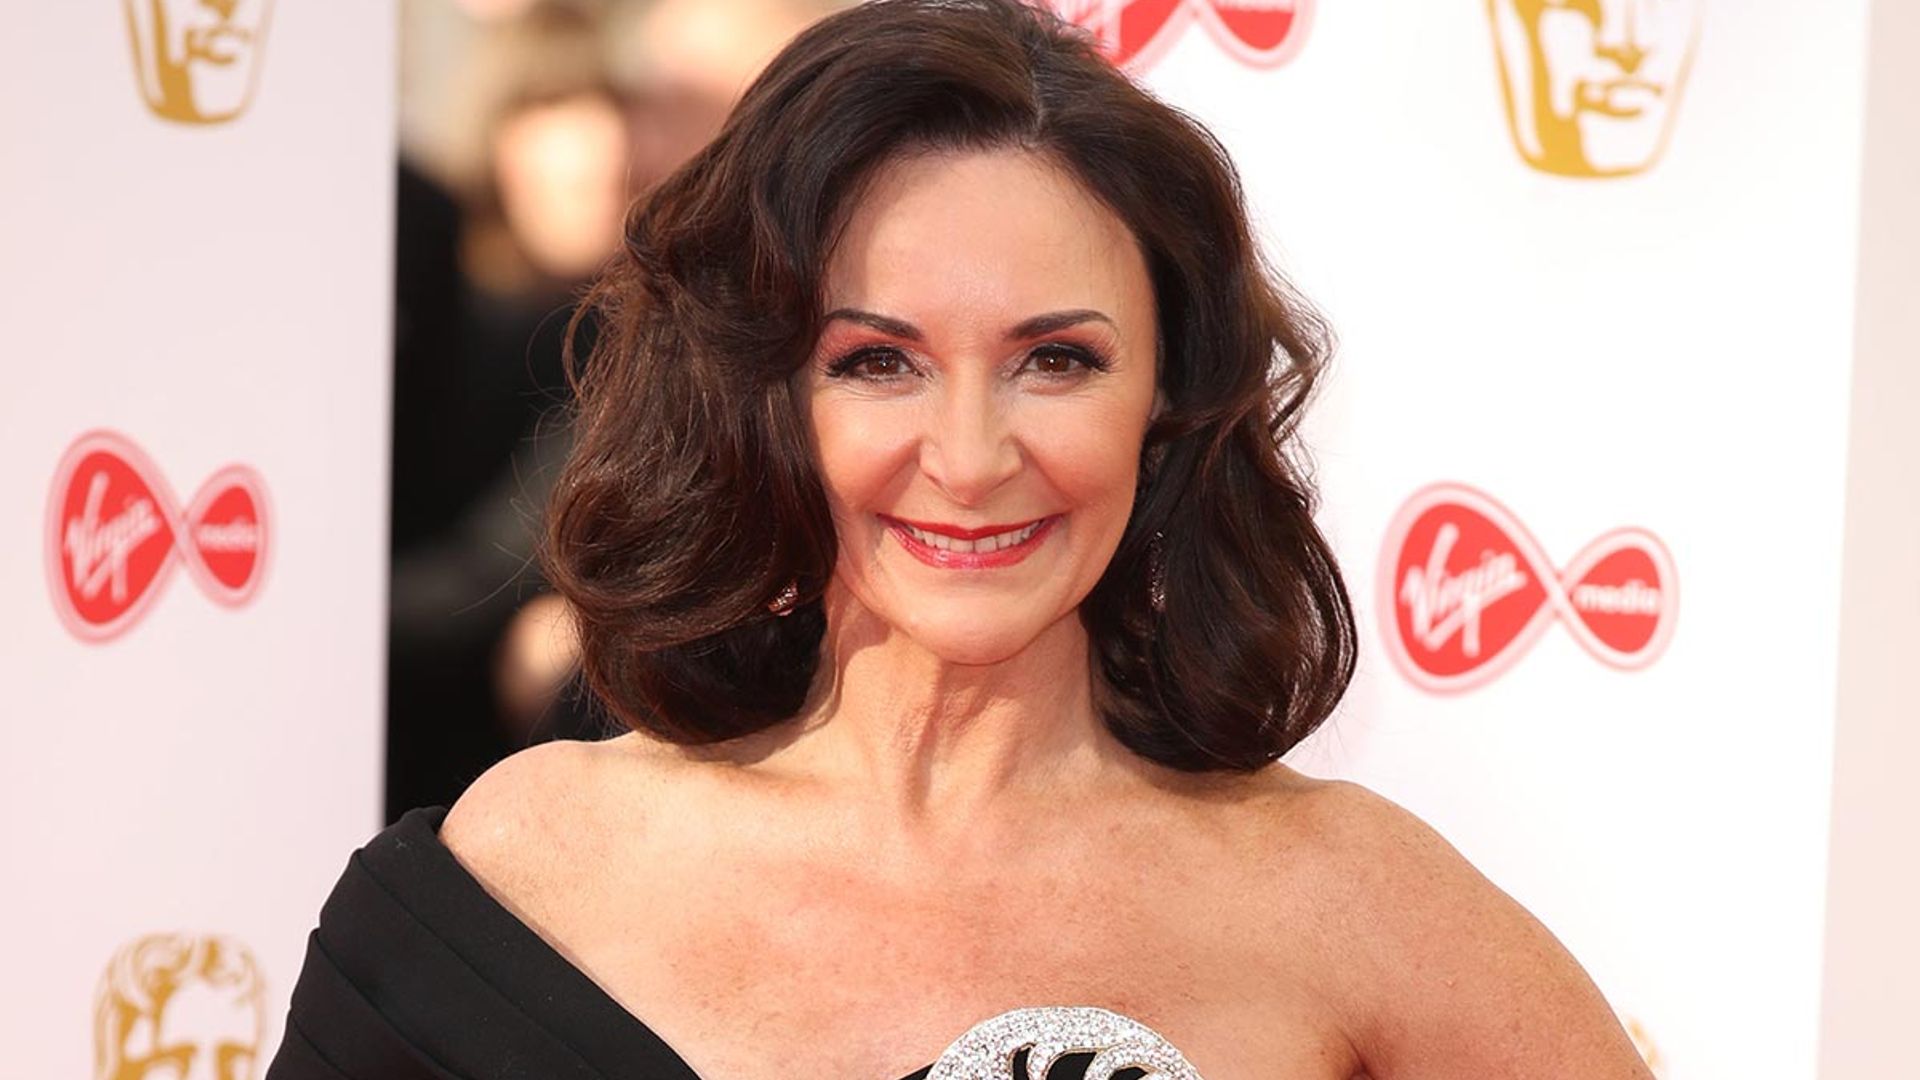 Shirley Ballas' honesty about the cosmetic treatments she's had is so refreshing